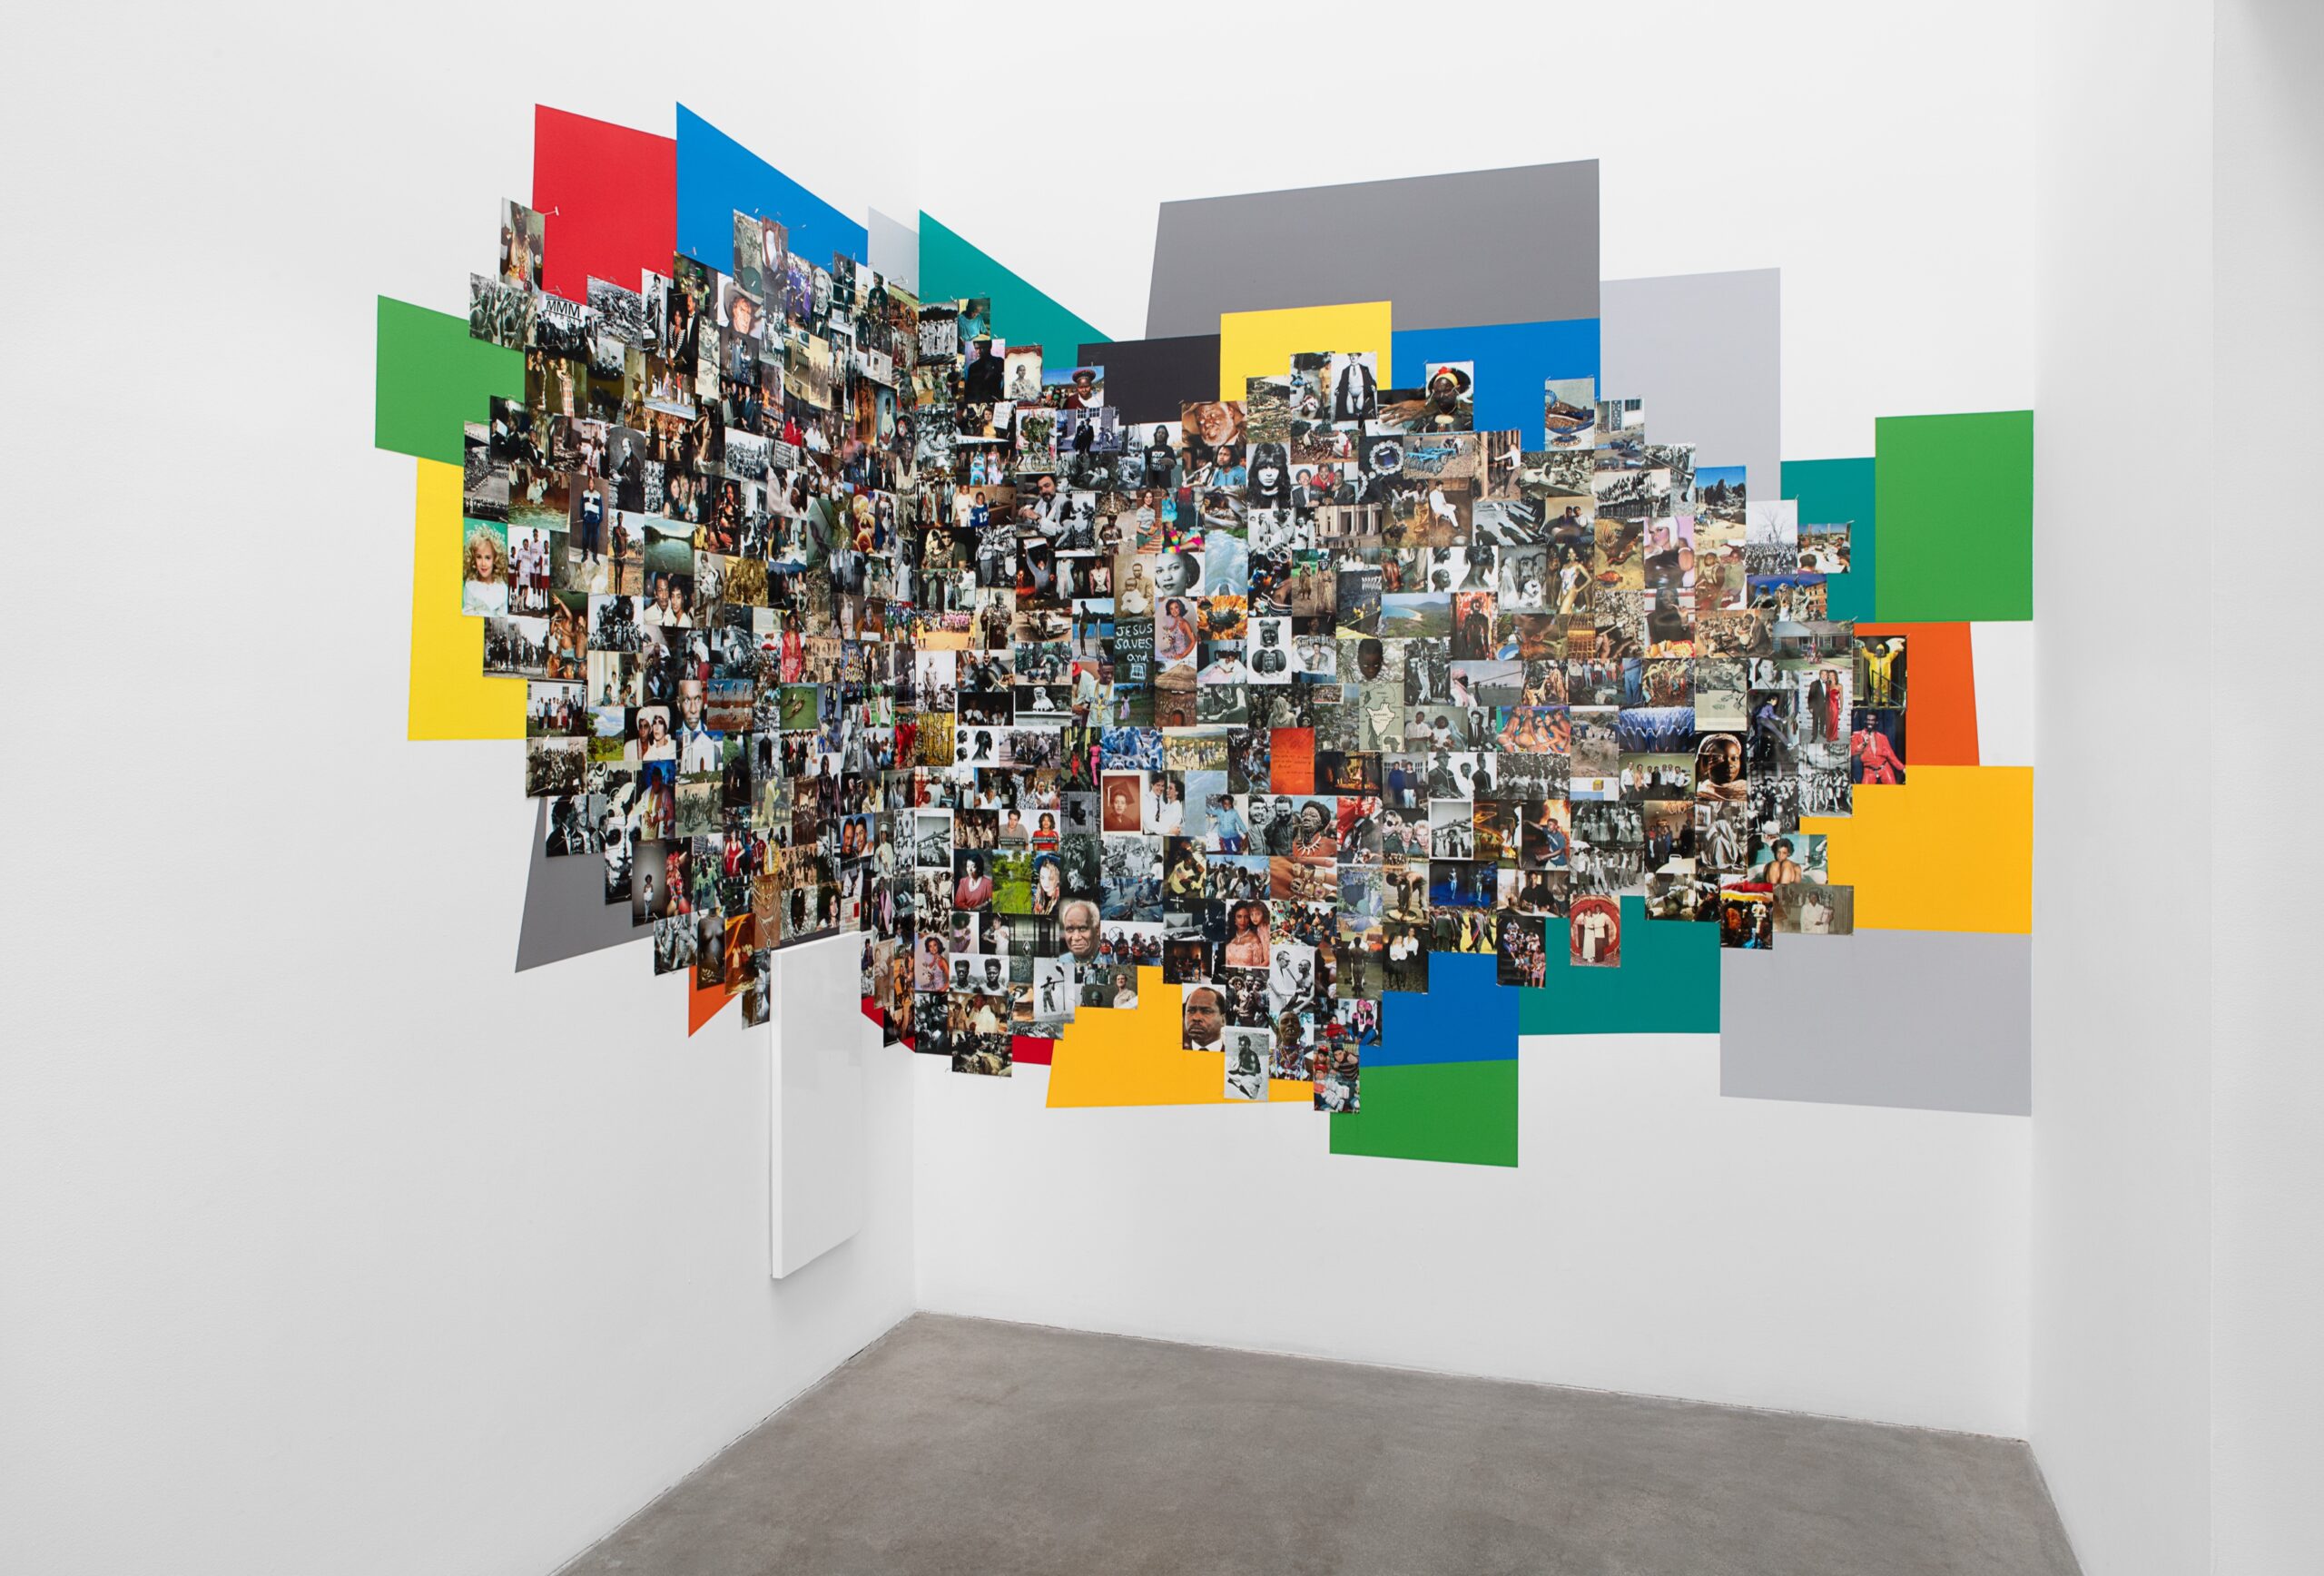 Deana Lawson, Assemblage, 2010- Present, Drugstore photographs and specimen pins variable, Courtesy the artist and David Kordansky, Los Angeles, CA